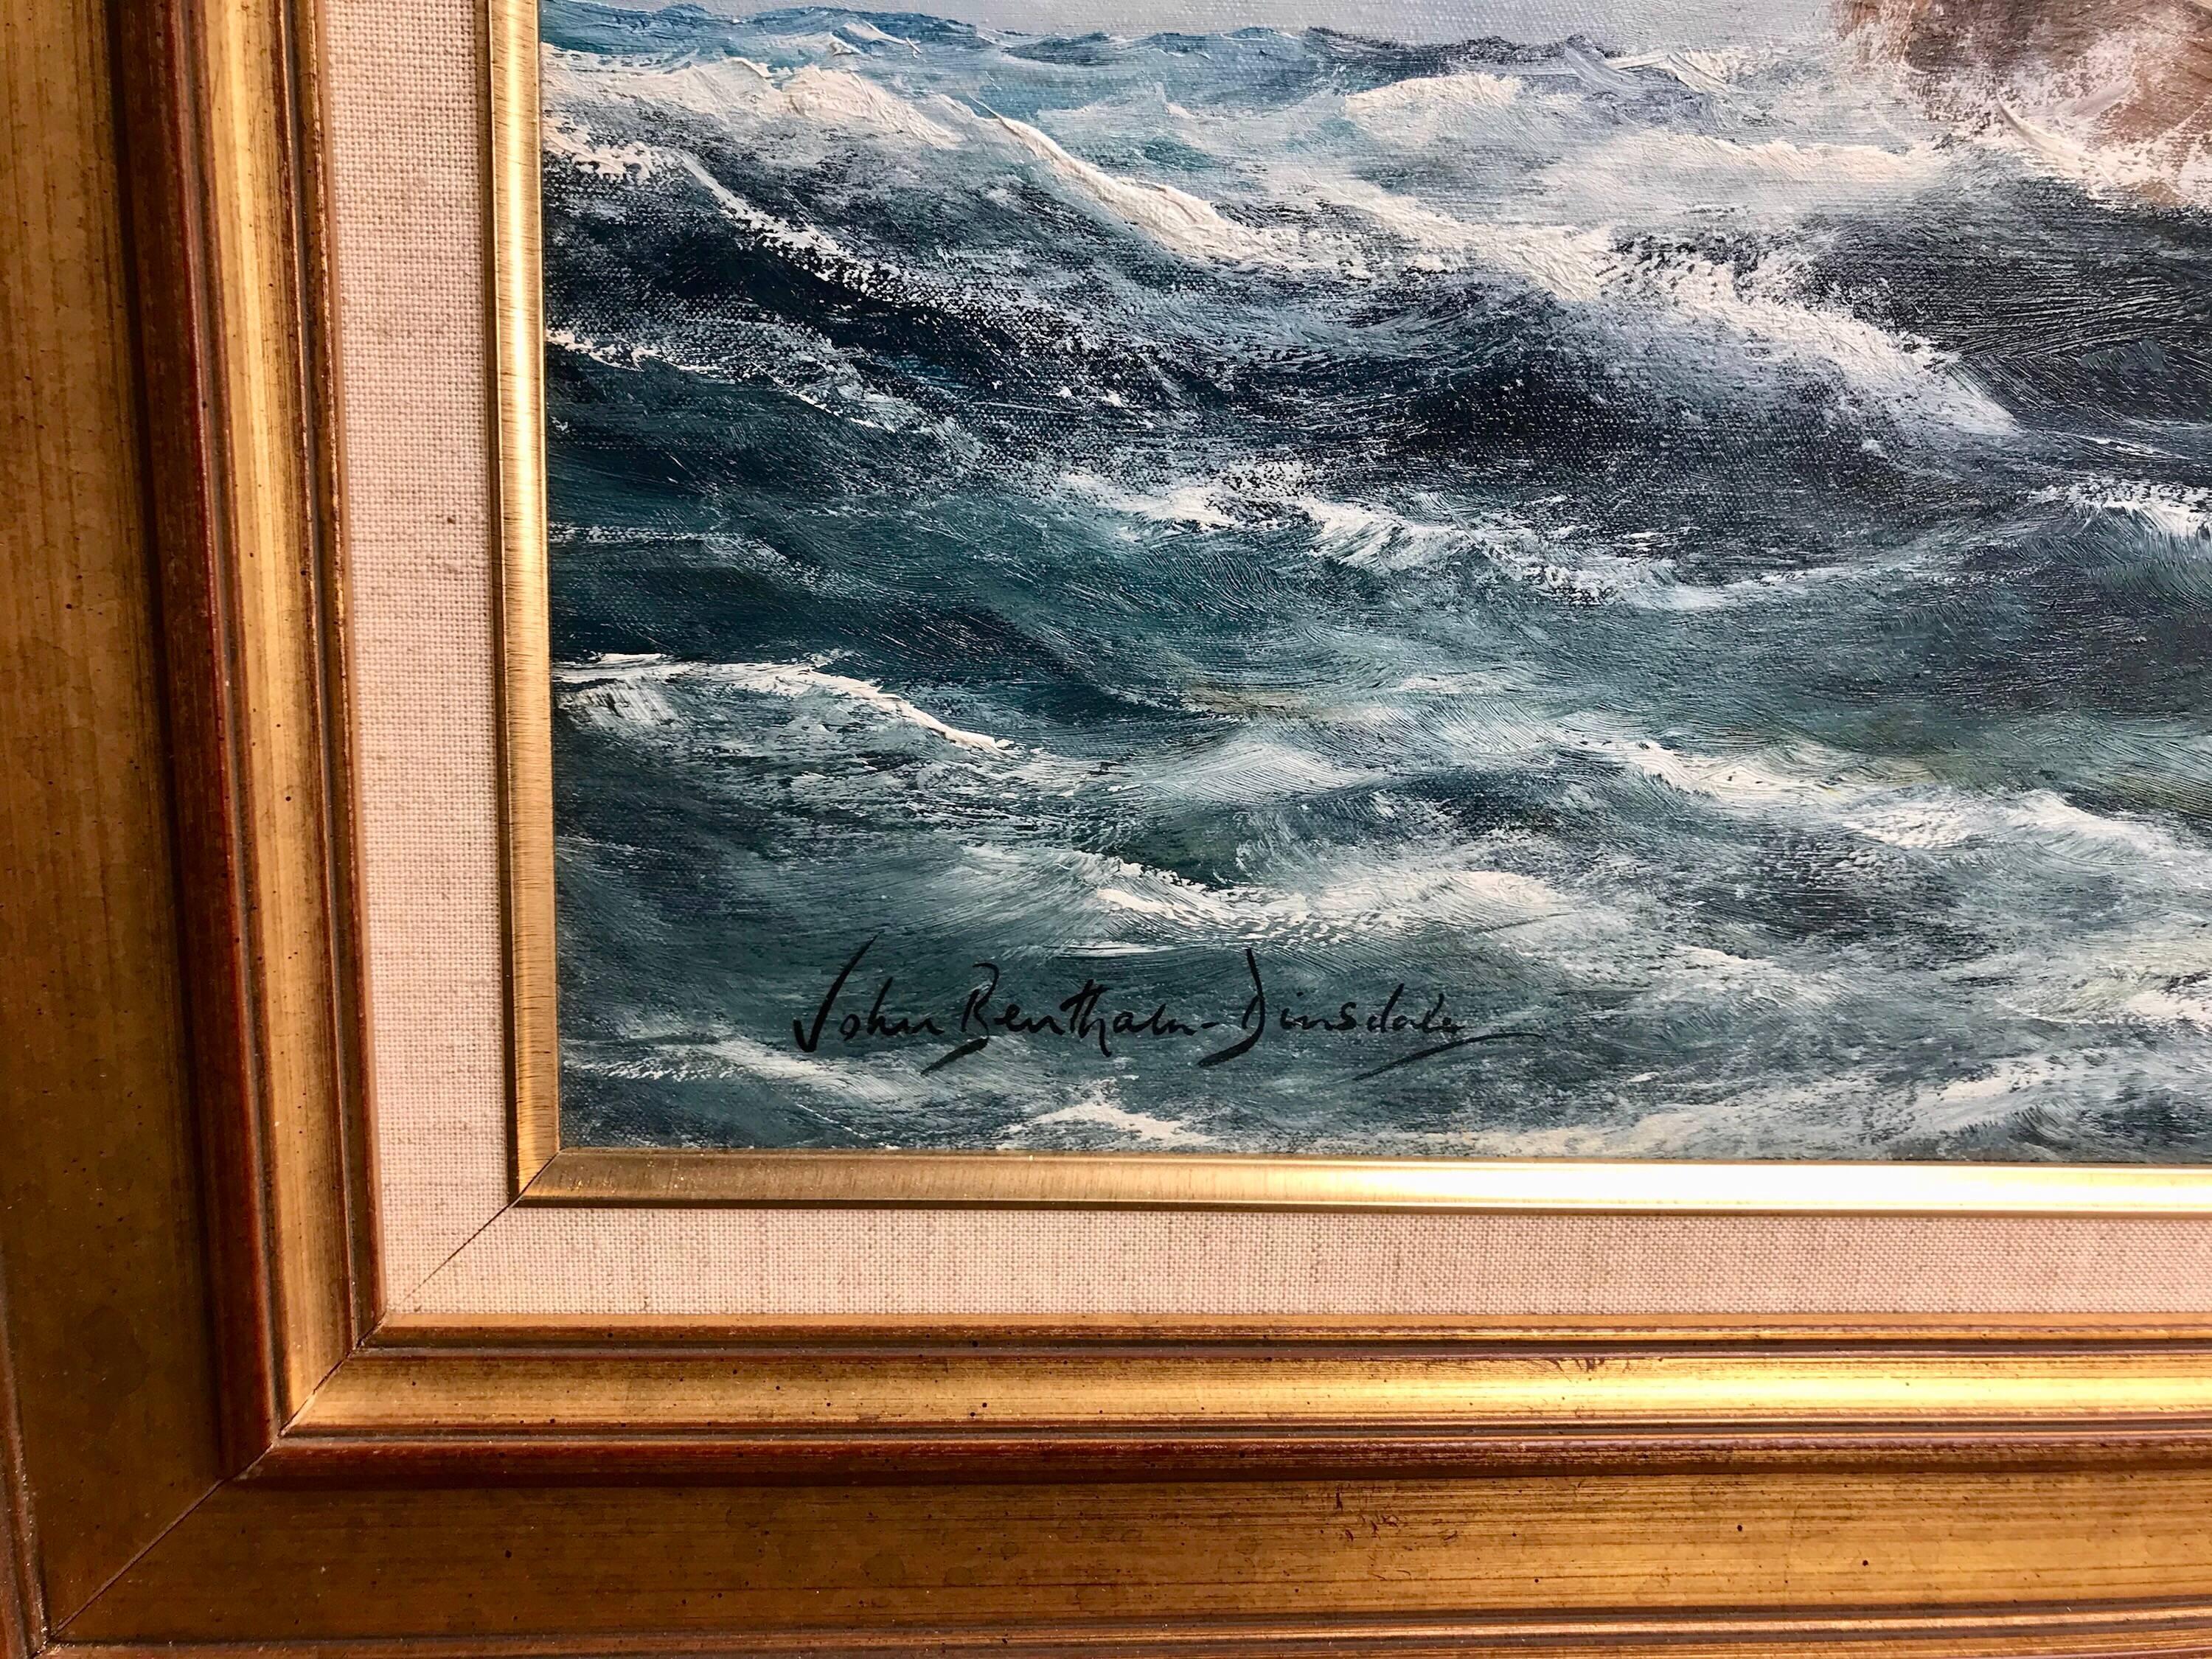 Signed lower left. (Born in Yorkshire, England in 1927; died in 2008). Dinsdale painted the sea and great ships of the era when “Britannia ruled the waves” with her fleets of clipper and fighting ships whose huge white sails took men across the seas